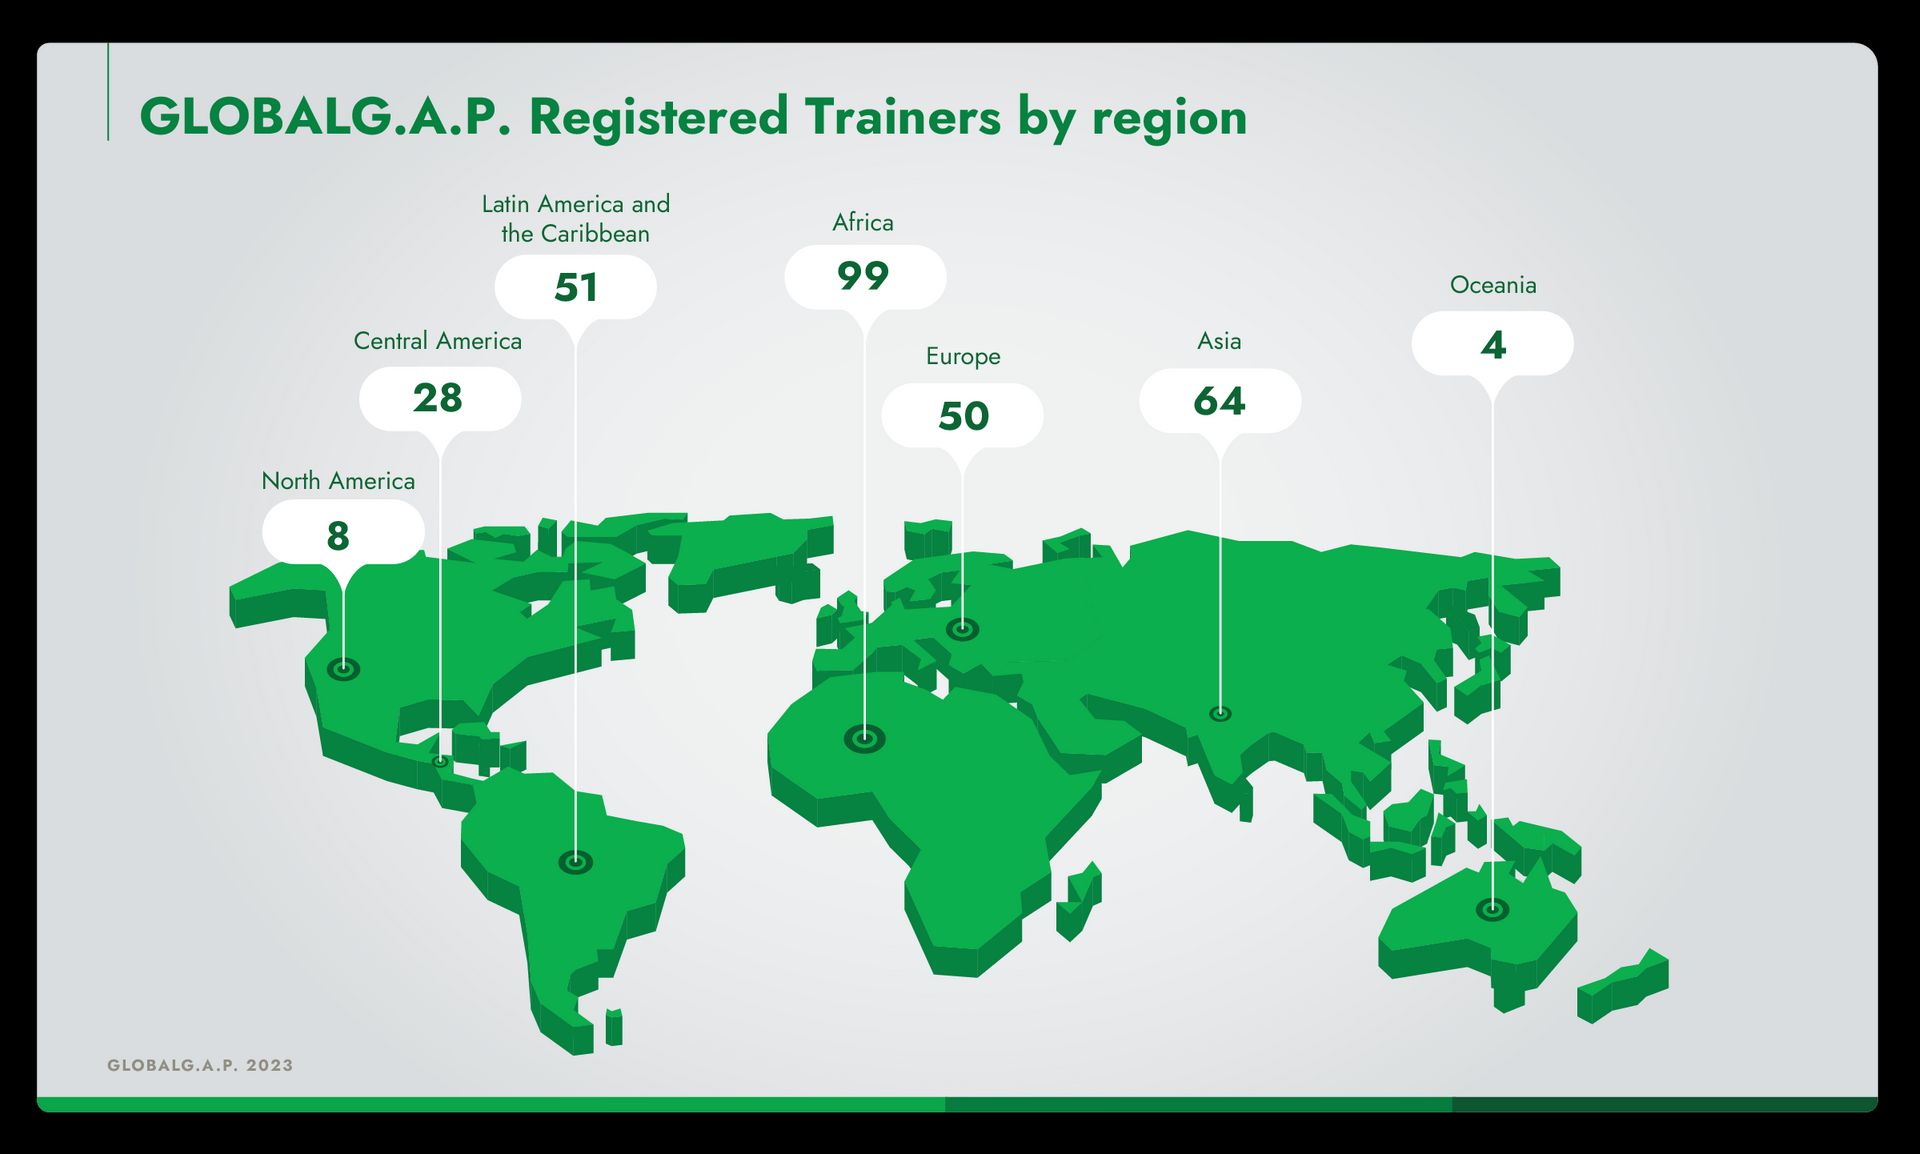 Infographic showing a world map with the number of GLOBALG.A.P. approved Registered Trainers per region